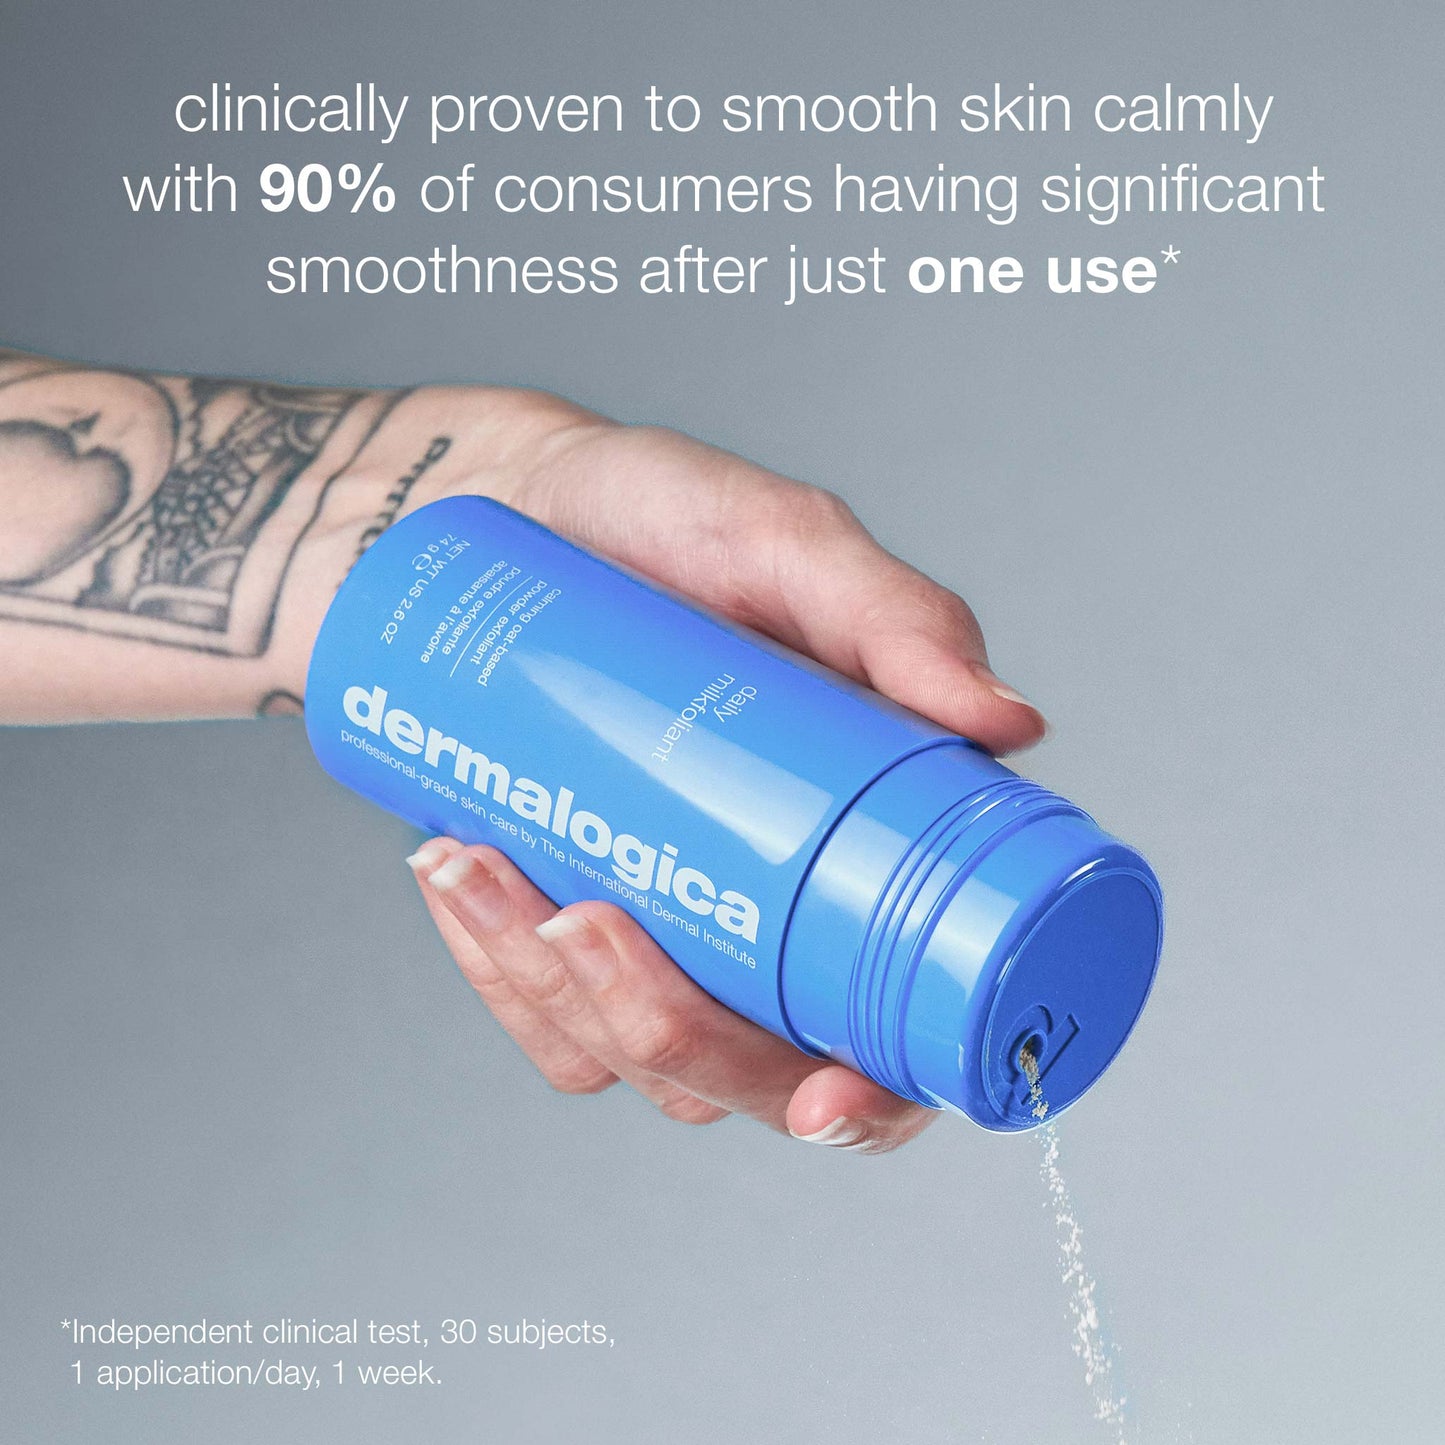 daily milkfoliant claim- clinically proven to smooth skin calmly with 90% of consumers having significant smoothness after just one use*